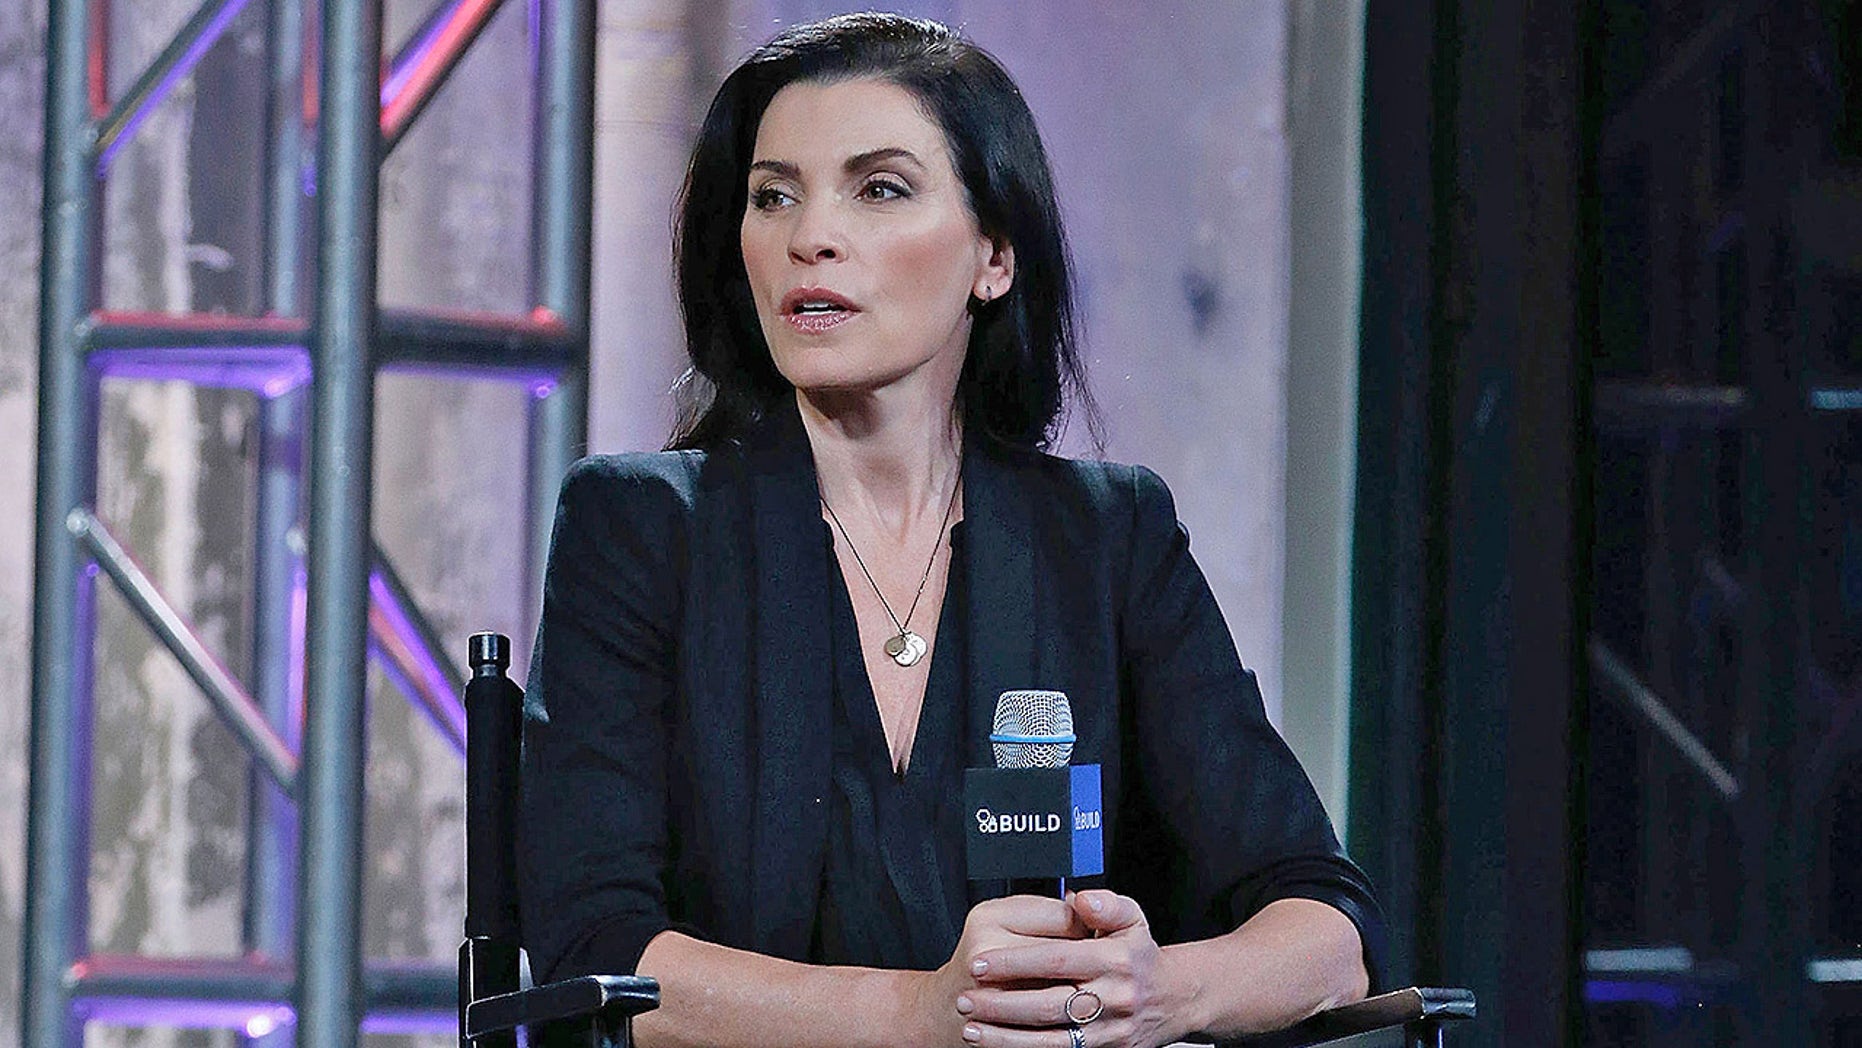 Julianna Margulies Refuses To Guest Star On The Good Fight Says She